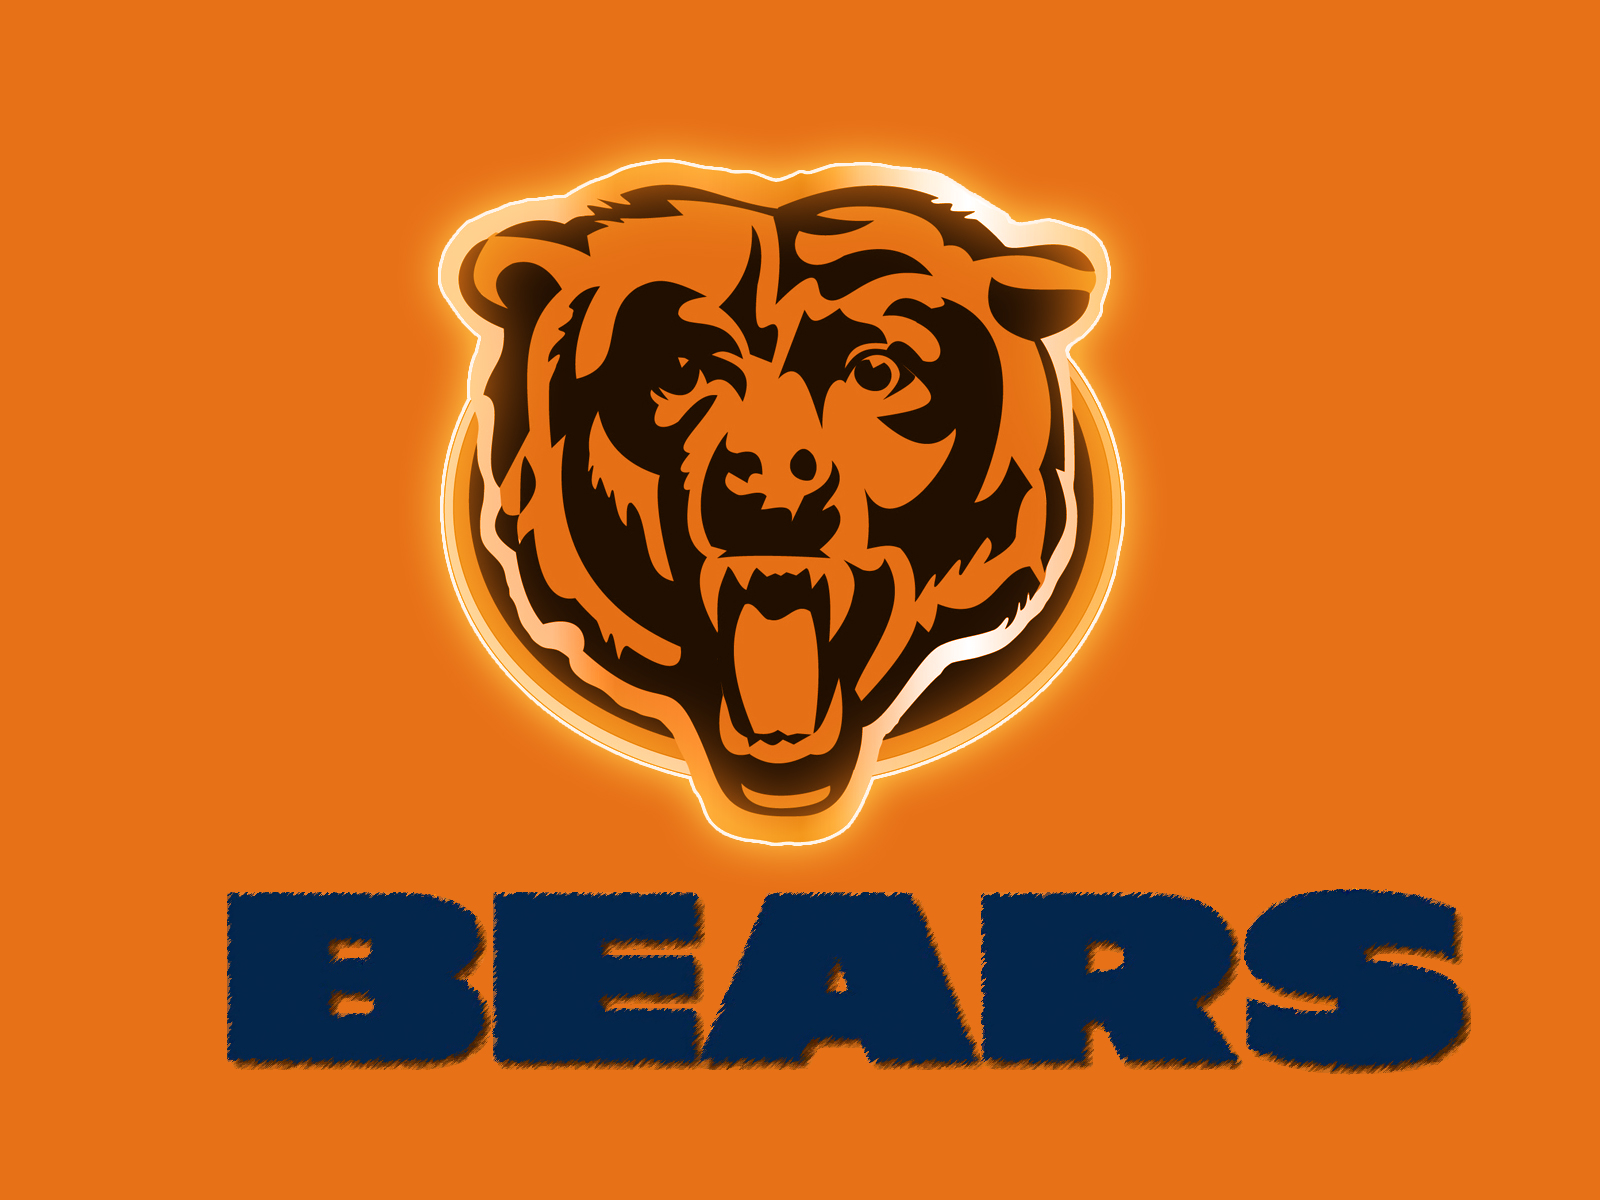 What are some stores that sell Chicago Bears wallpaper?